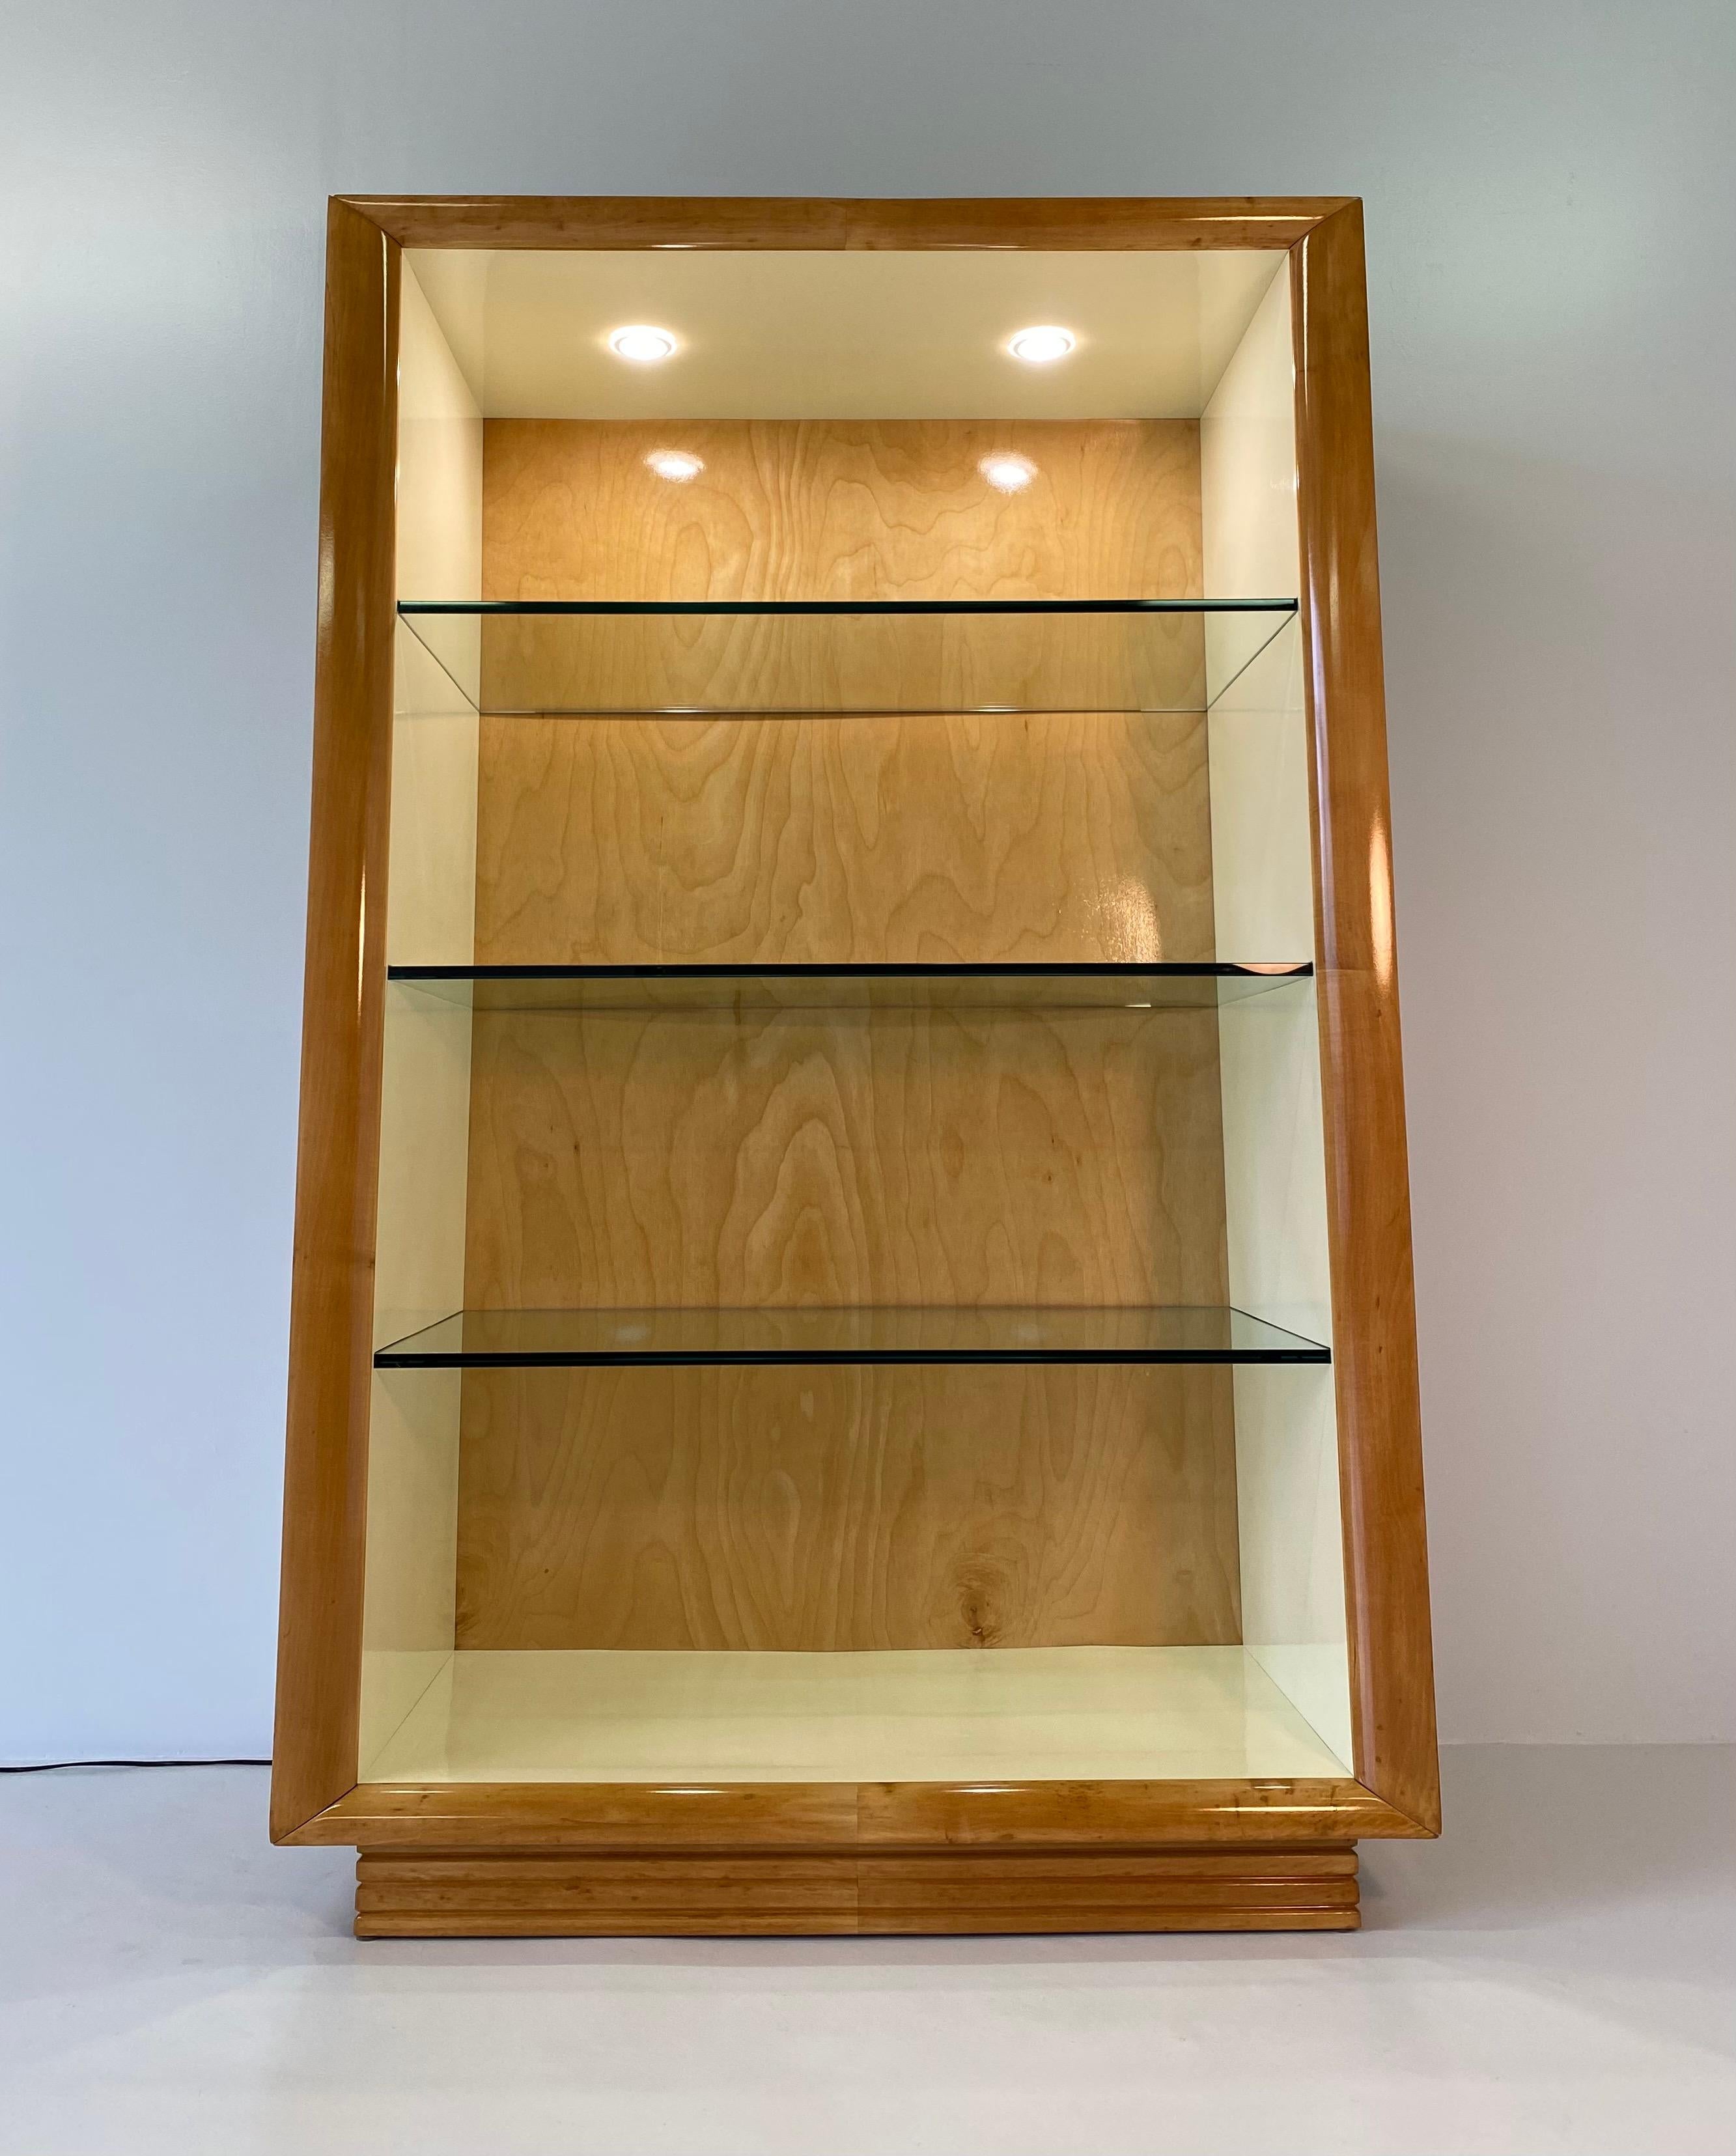 This bookcase or cabinet for sculptures was produced in the 1940s
in Italy and is entirely covered in fine maple wood.
The internal part is in ivory lacquer with three glass shelves.
The compartment is illuminated with two spotlights which create